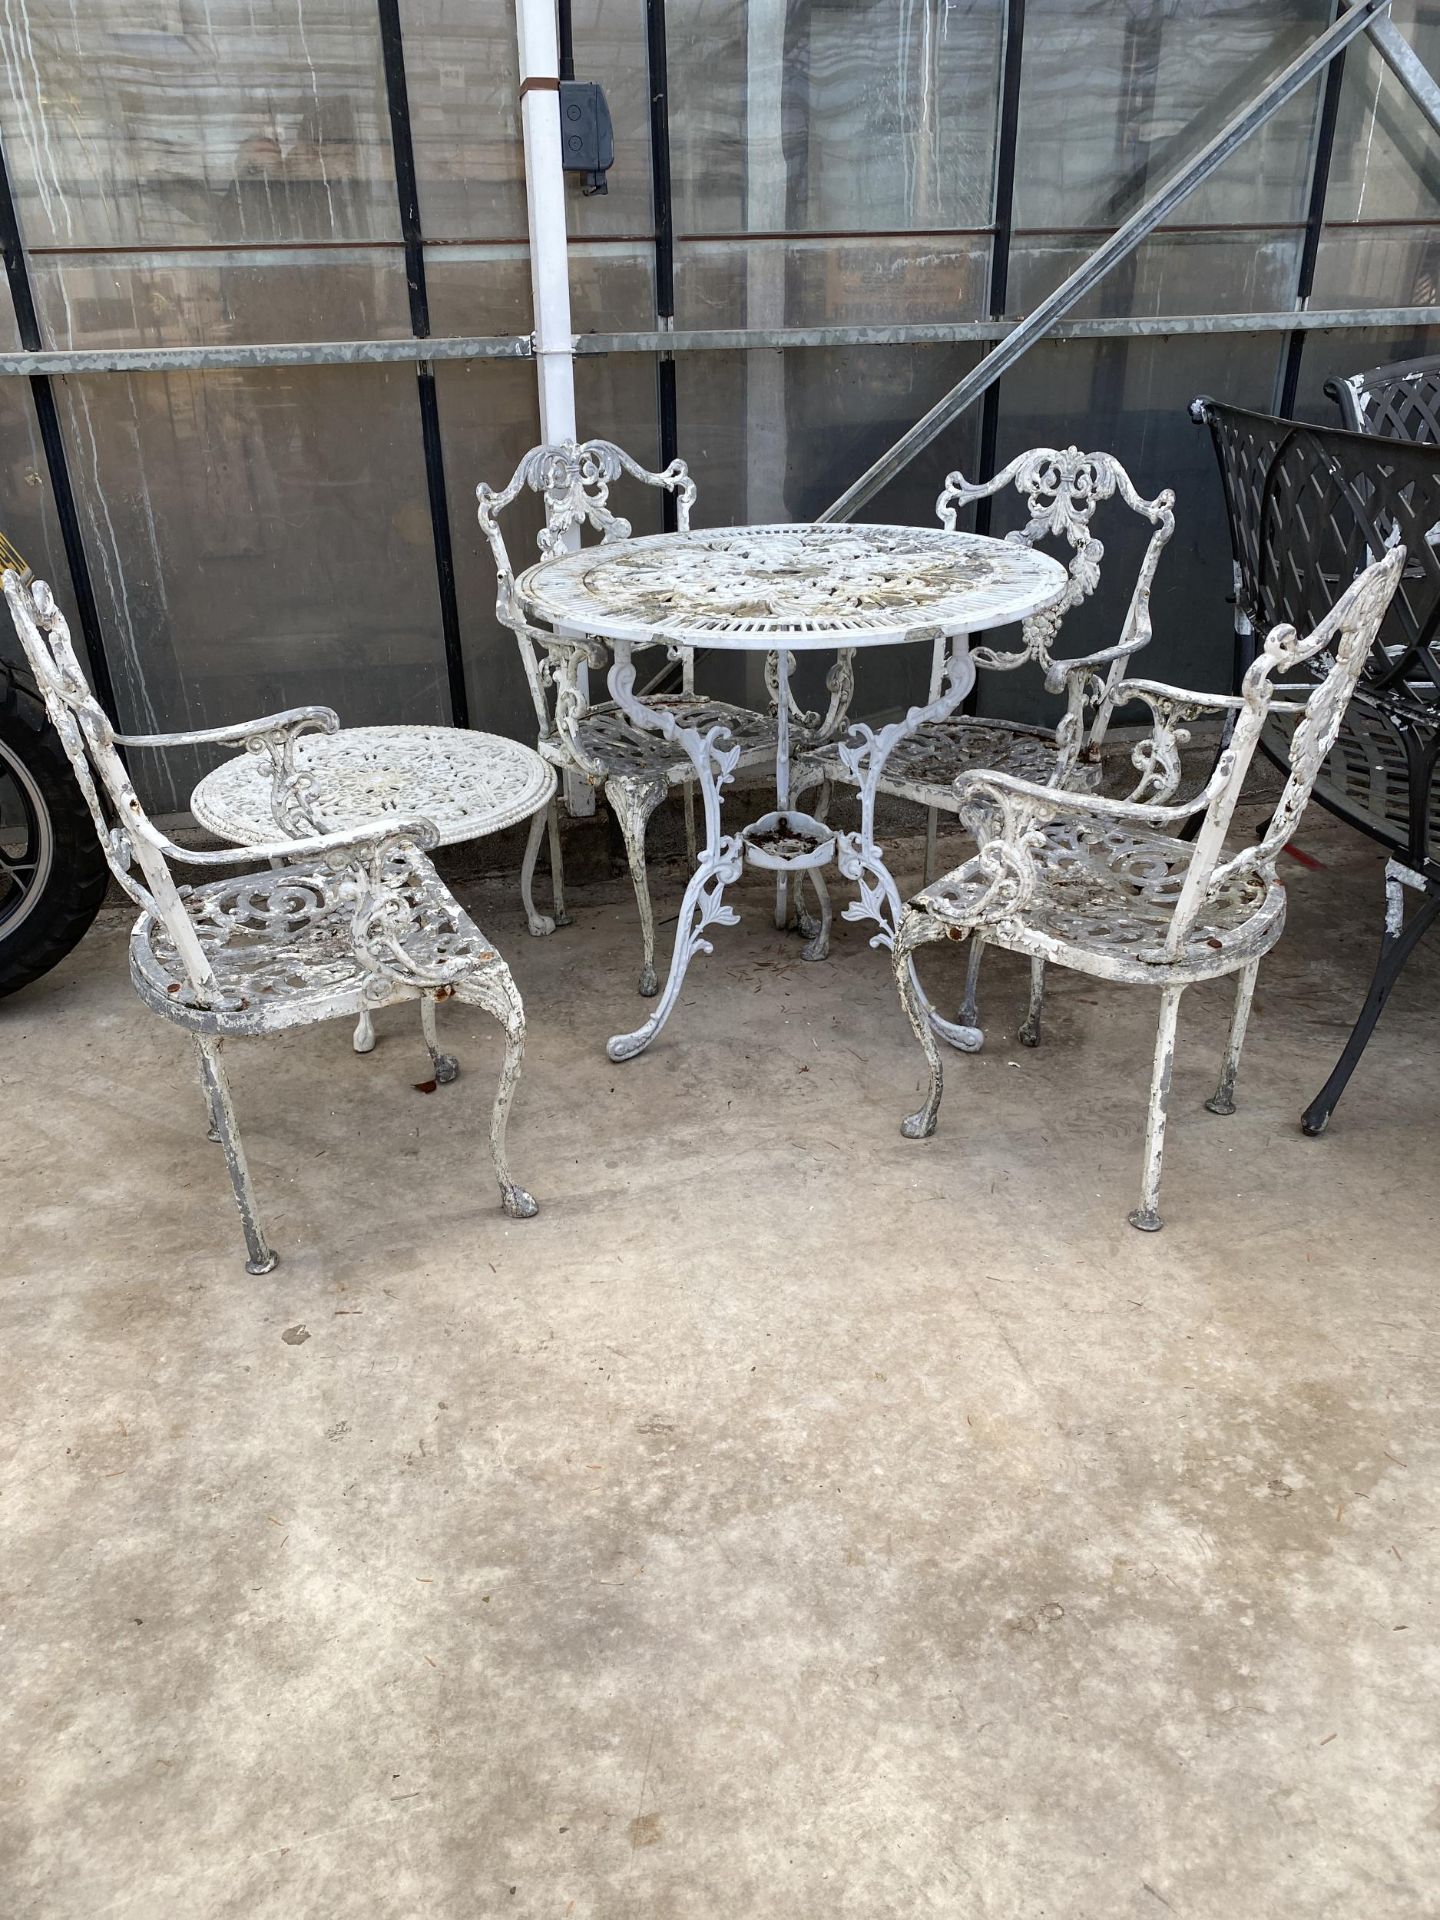 A VINTAGE CAST ALLOY BISTRO SET COMPRISING OF A ROUND TABLE, FOUR CARVER CHAIRS AND A COFFEE TABLE - Image 2 of 5